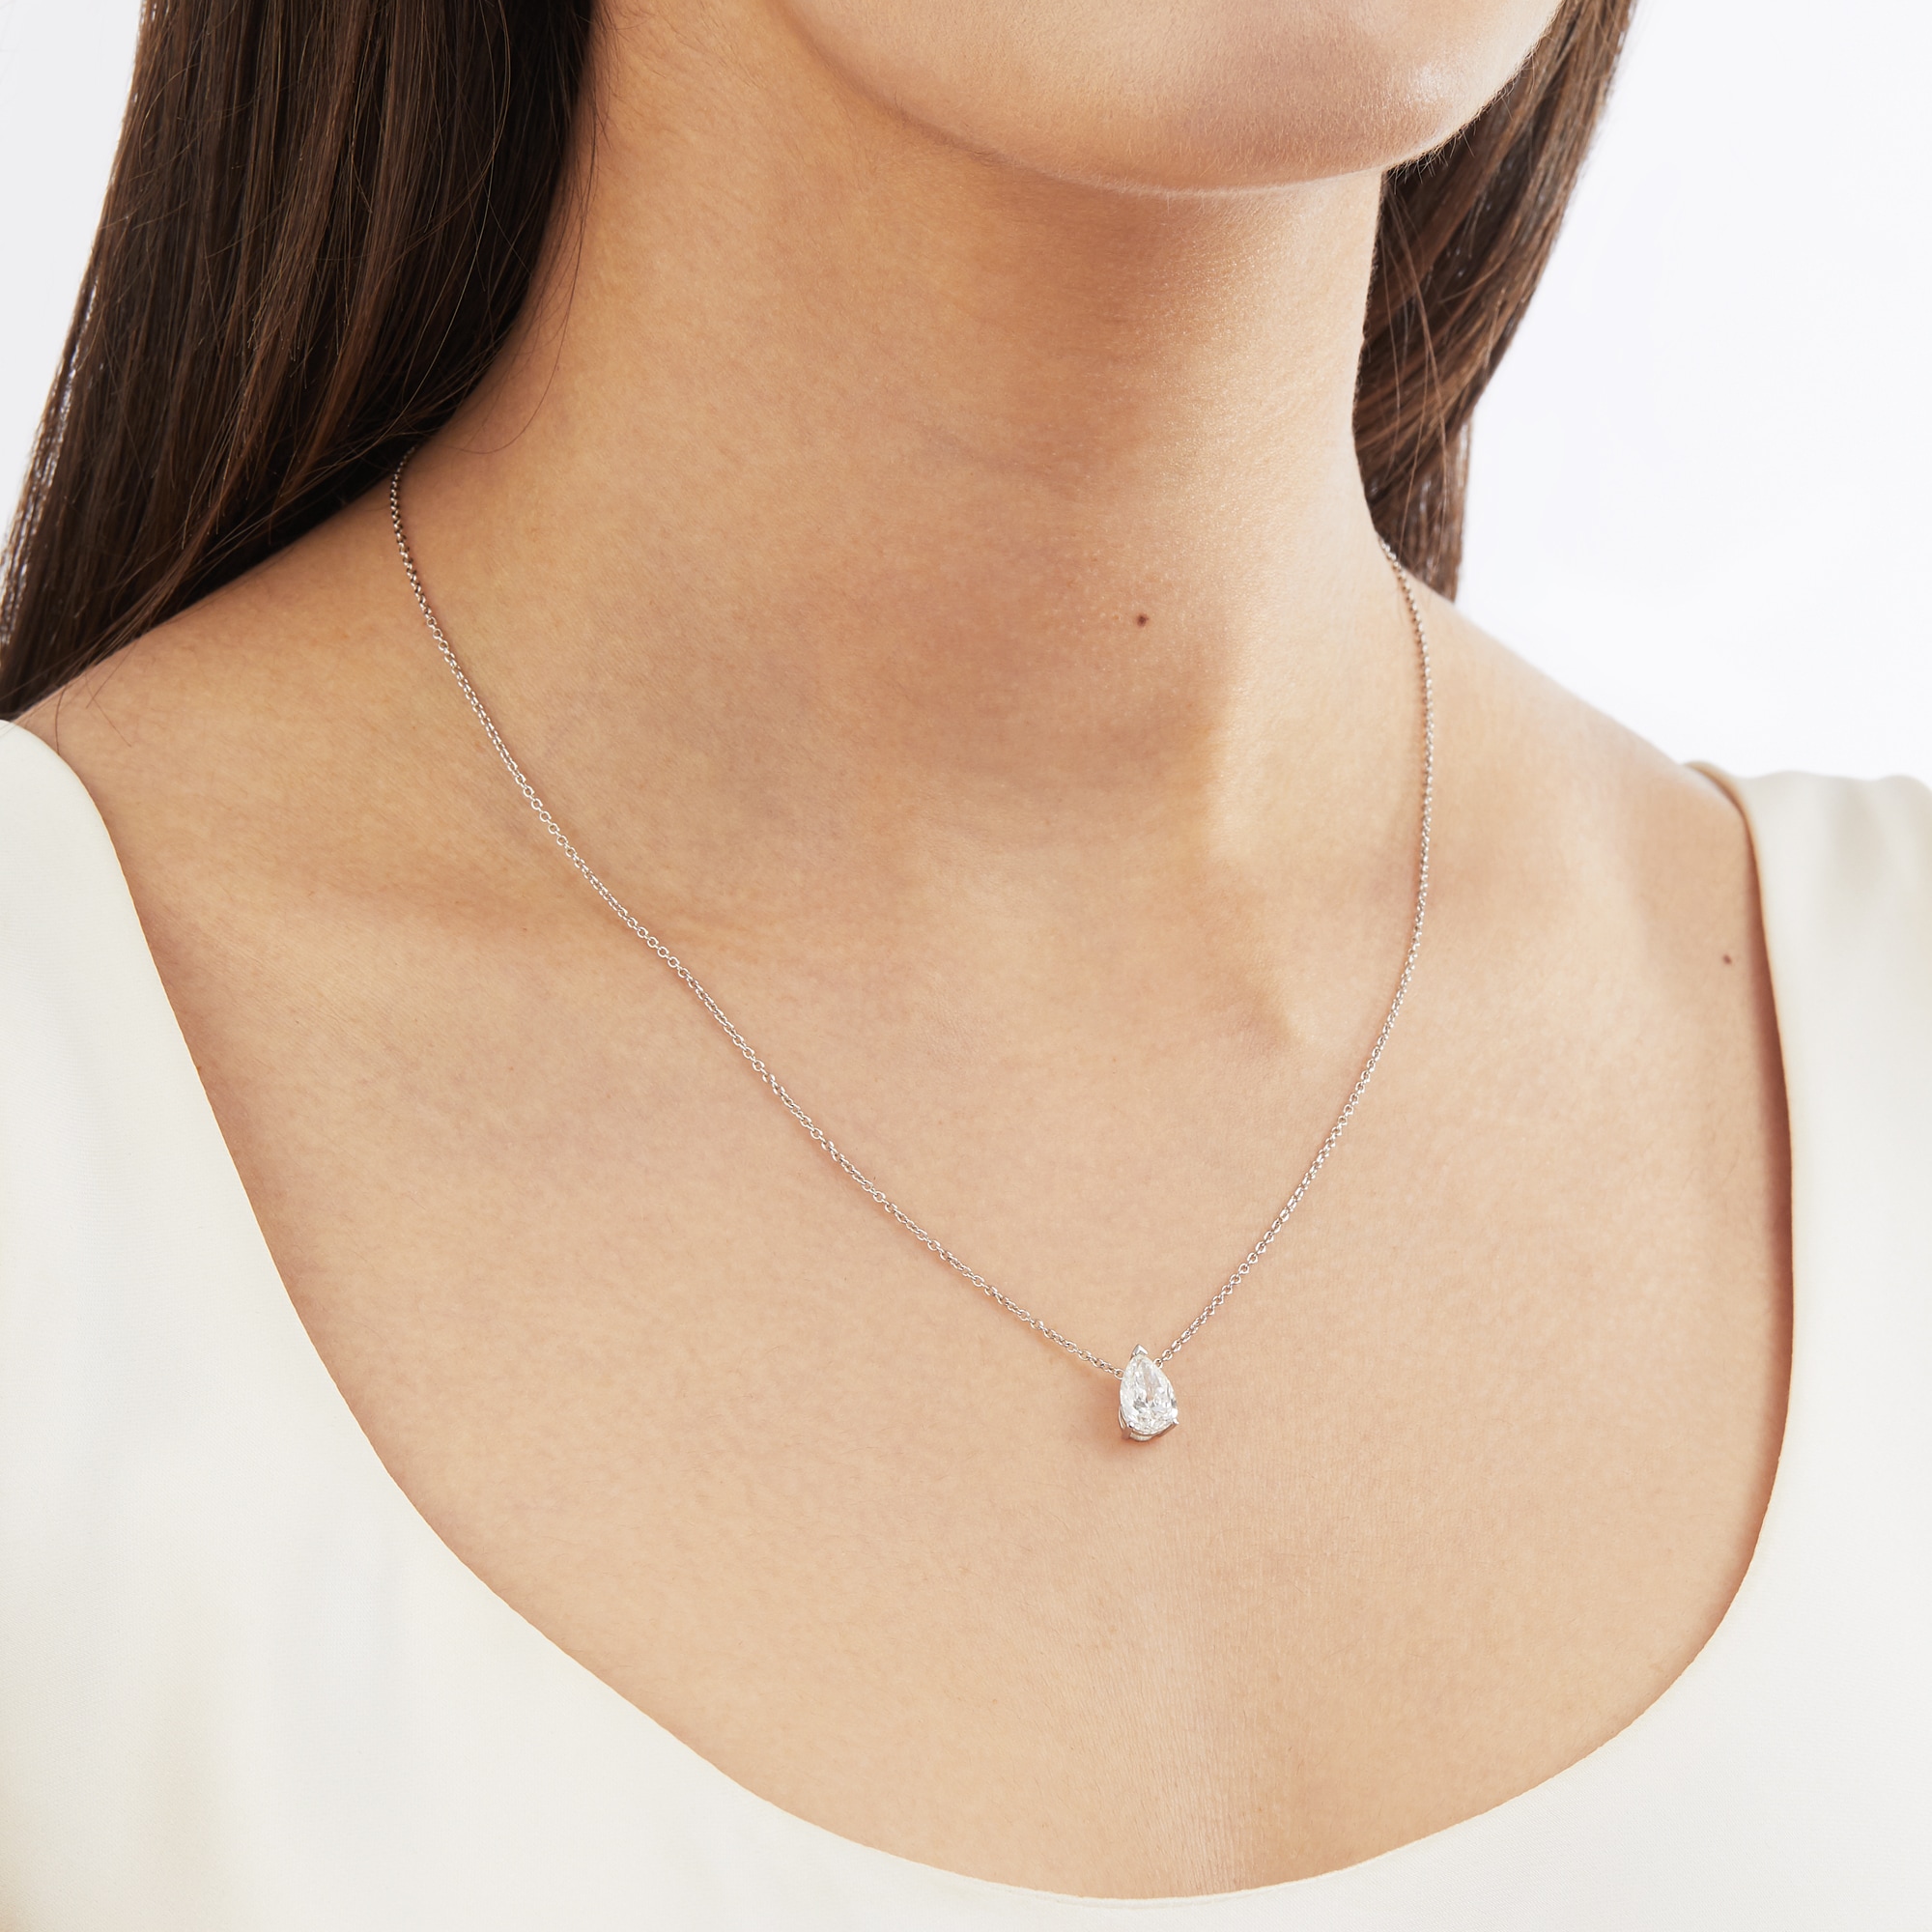 Stunning 3 Carat Pear Shaped Diamond Necklace In White Gold